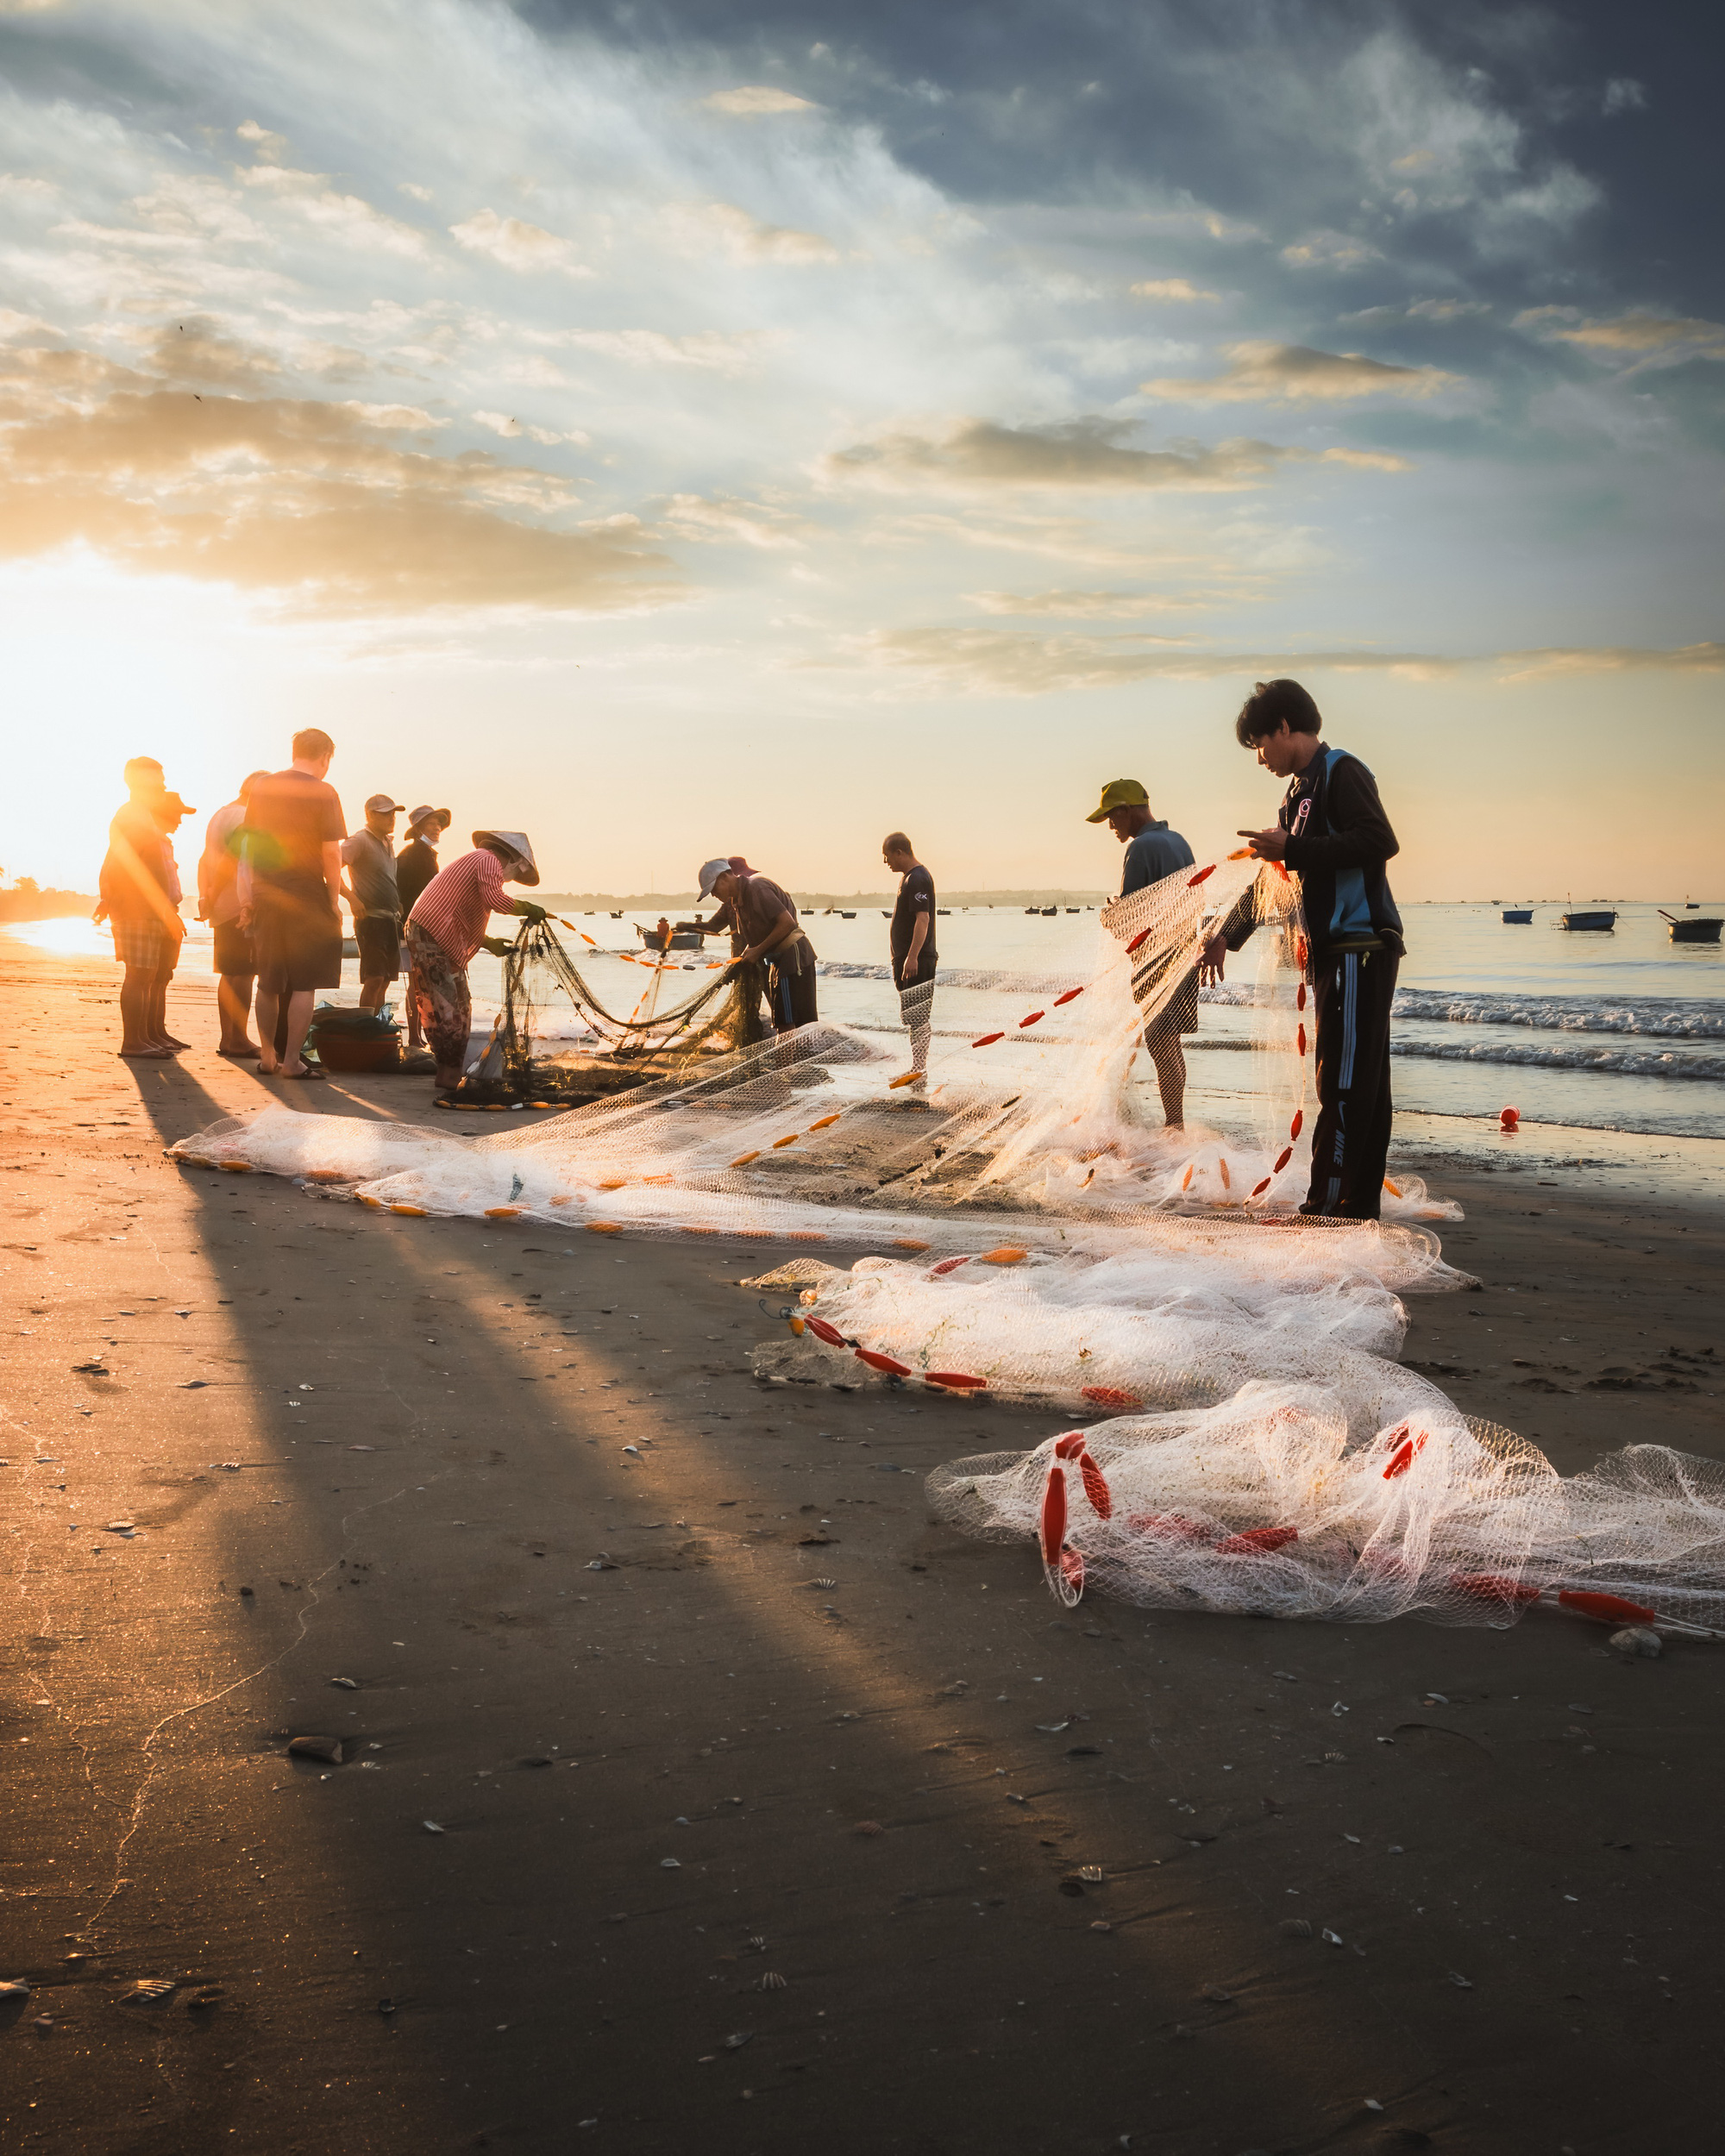 Locals sort seafood after a fishing trip in the early morning at a fishing village in Mui Ne, a coastal town in Binh Thuan Province, southern-central Vietnam. Photo taken by Harry Bradley